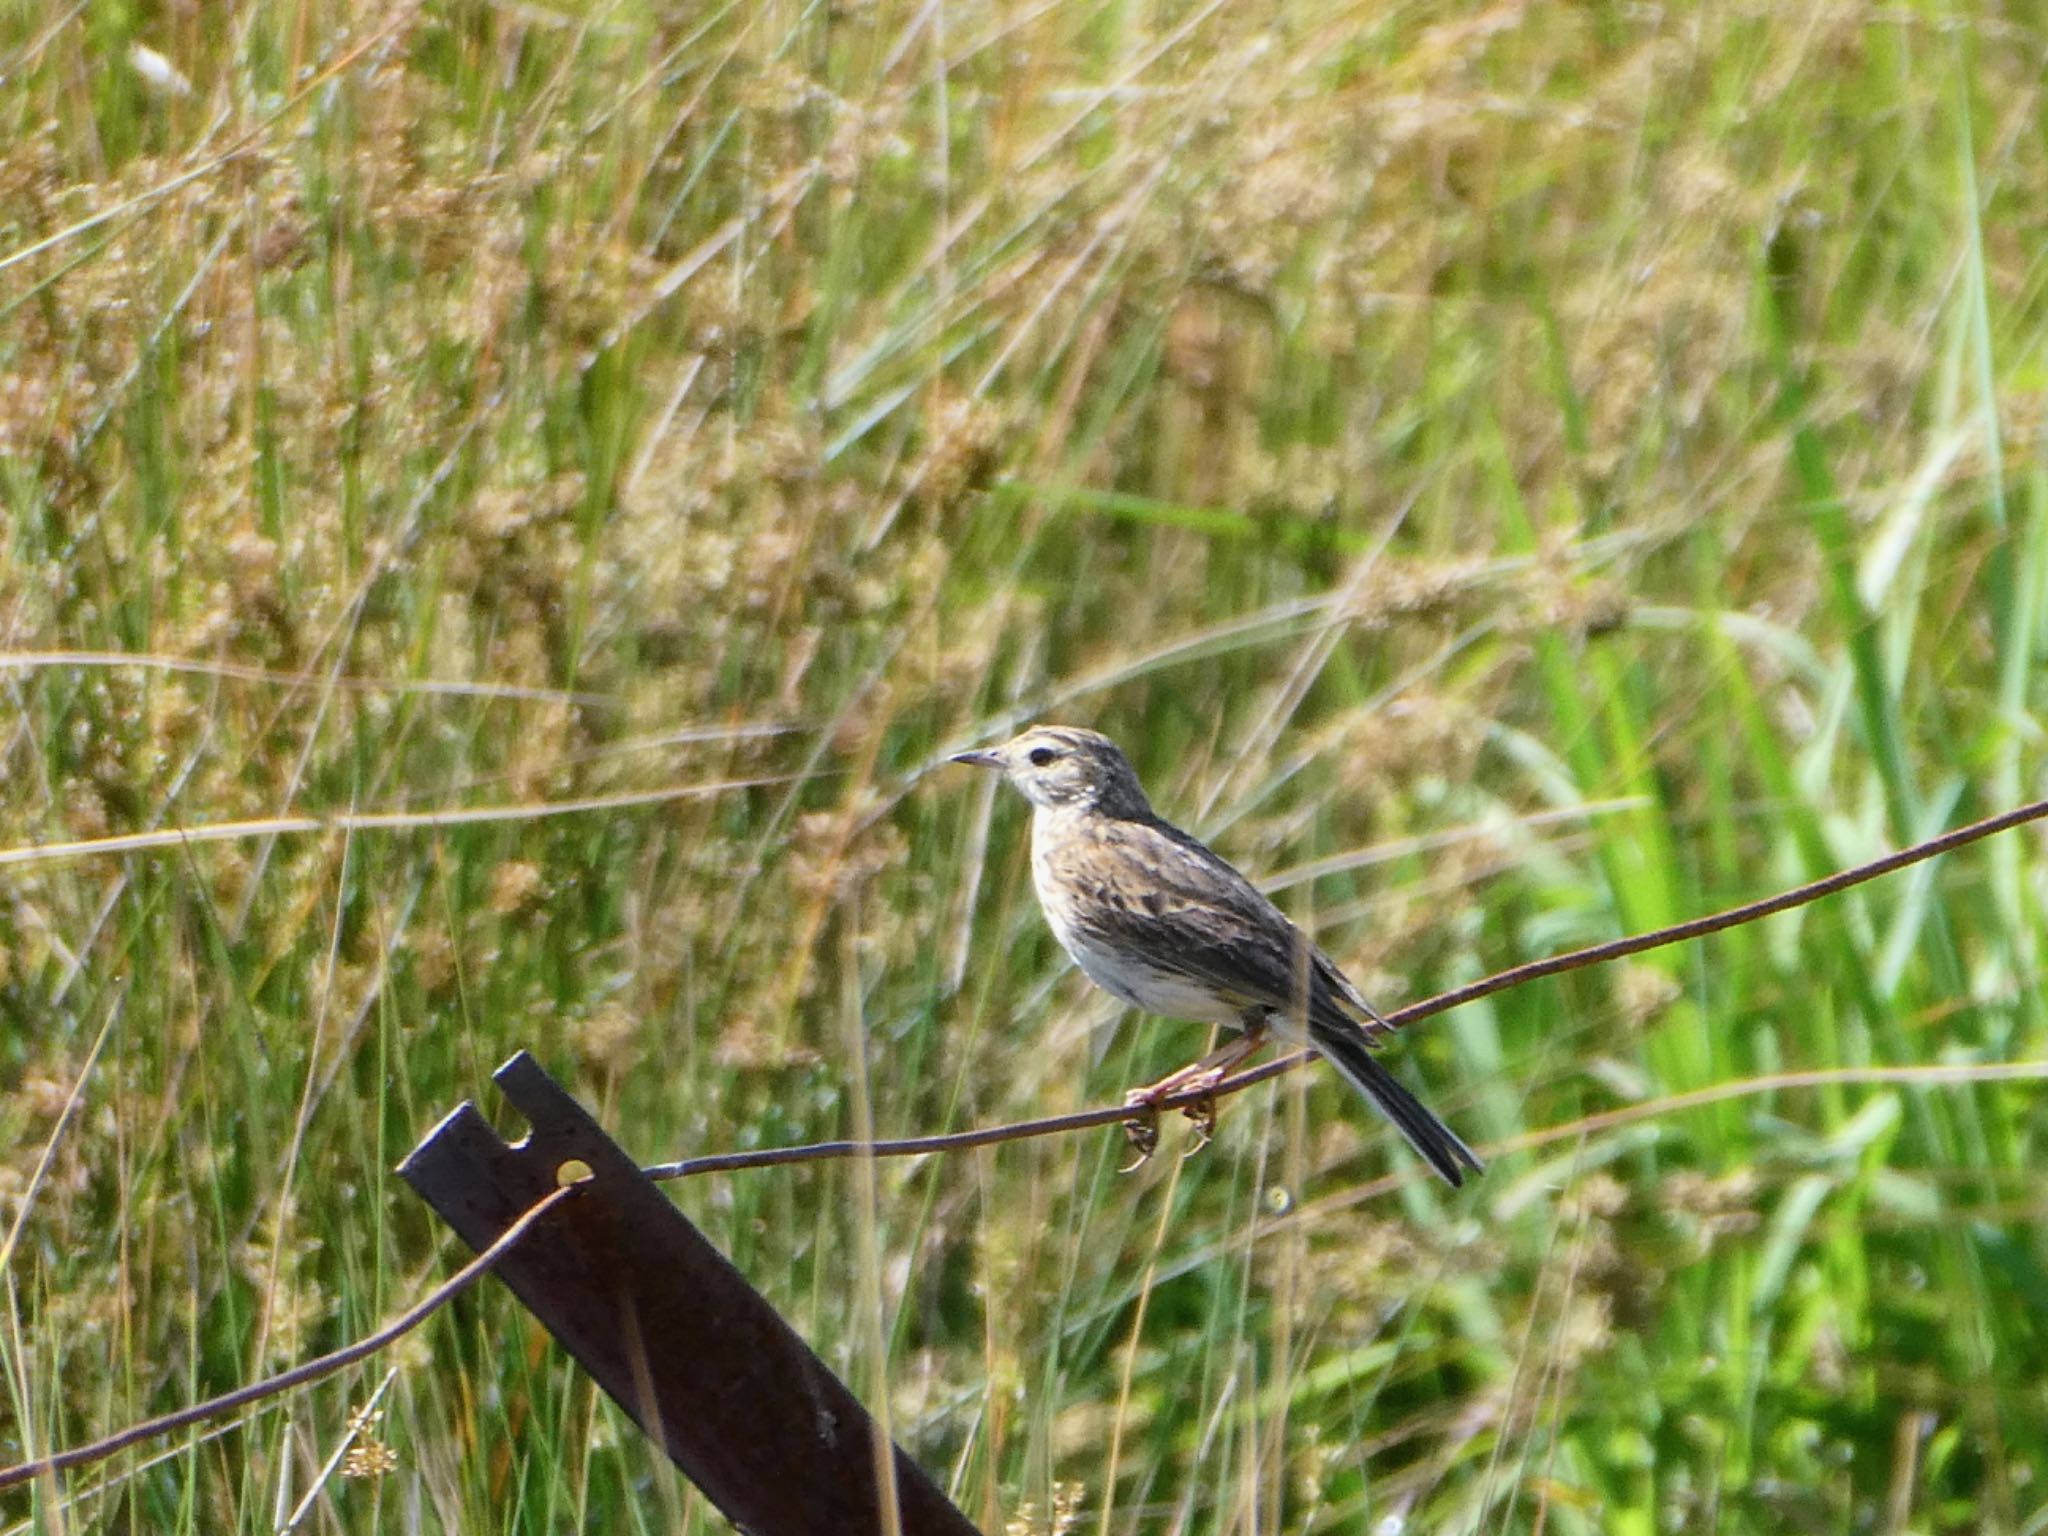 Photo of Australian Pipit at Central Coast Wetlands, MSW, Australia by Maki